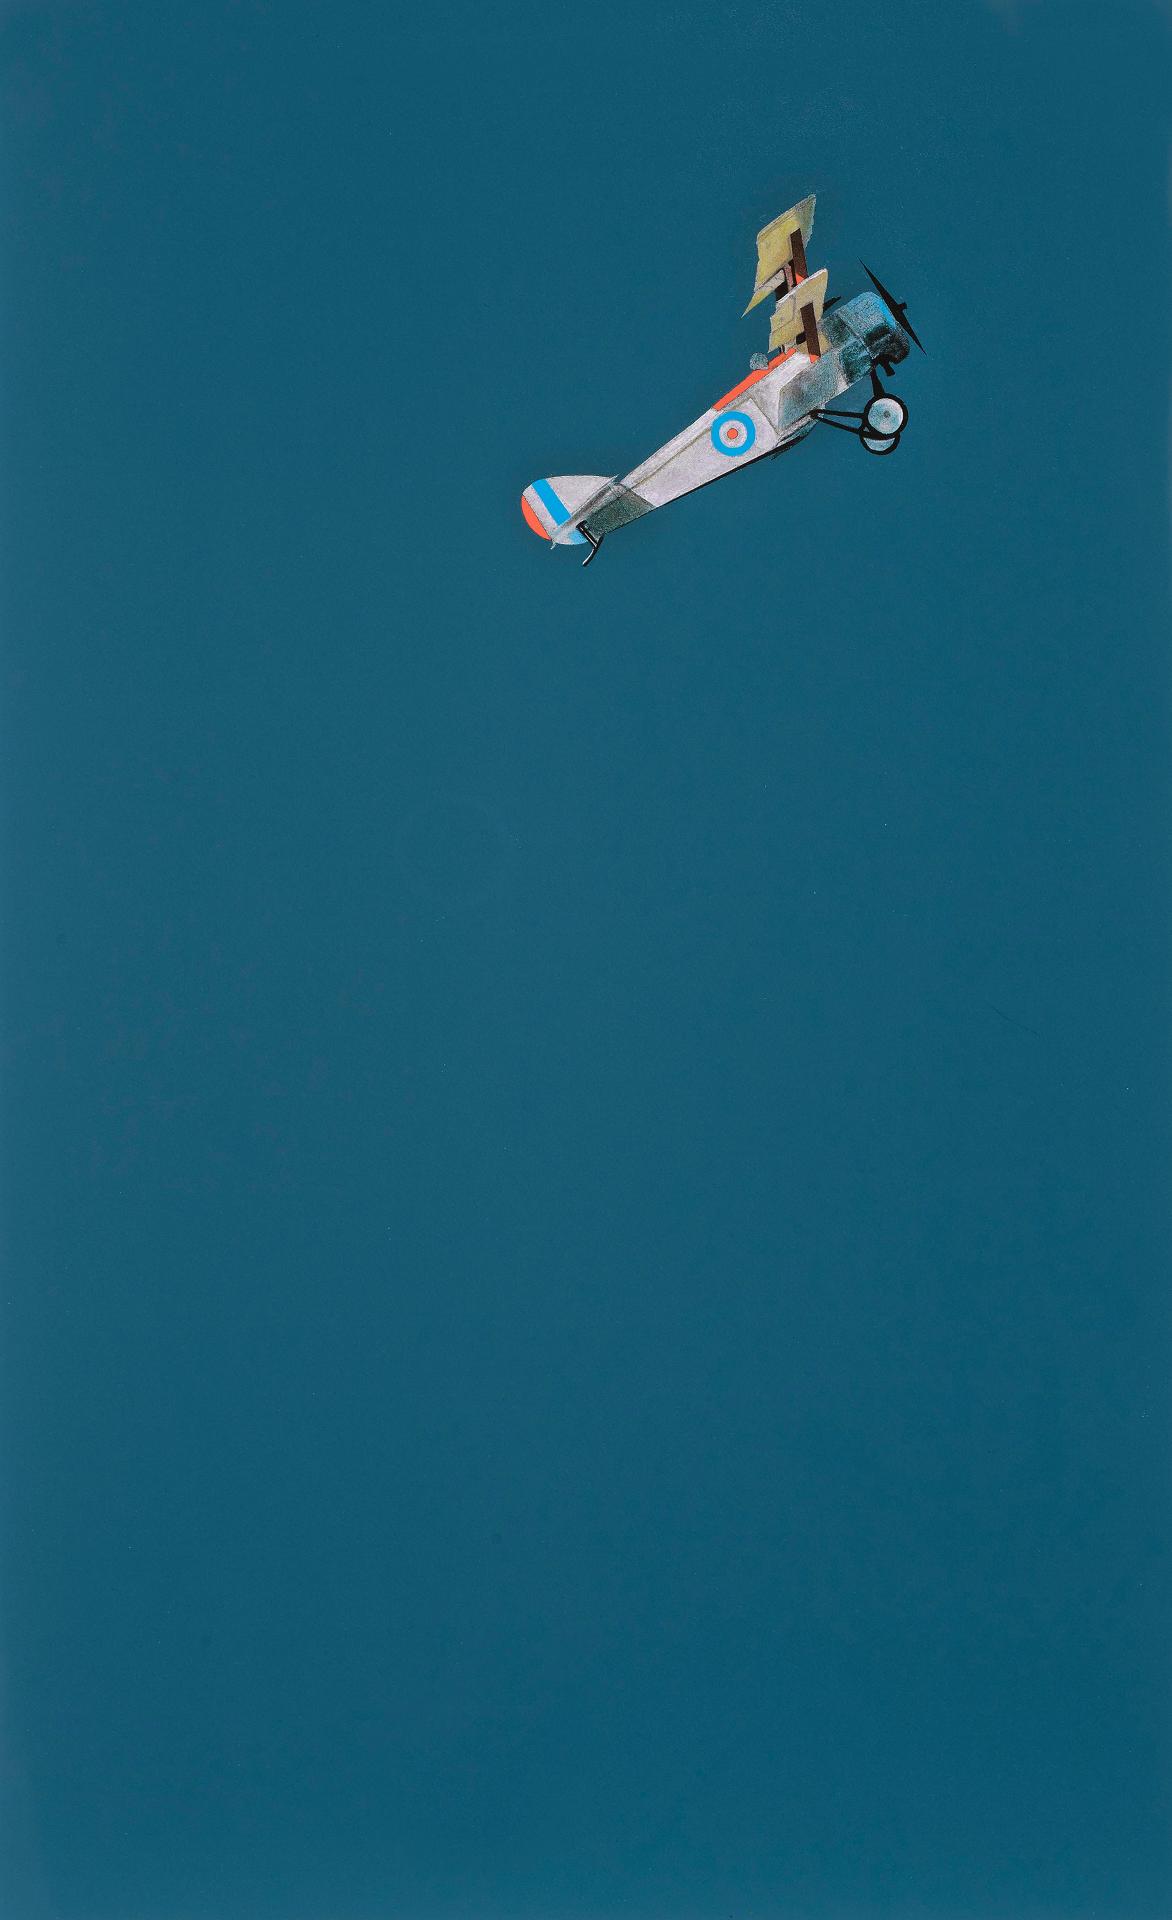 Charles Pachter (1942) - Charles Pachter, Airborne, 2014